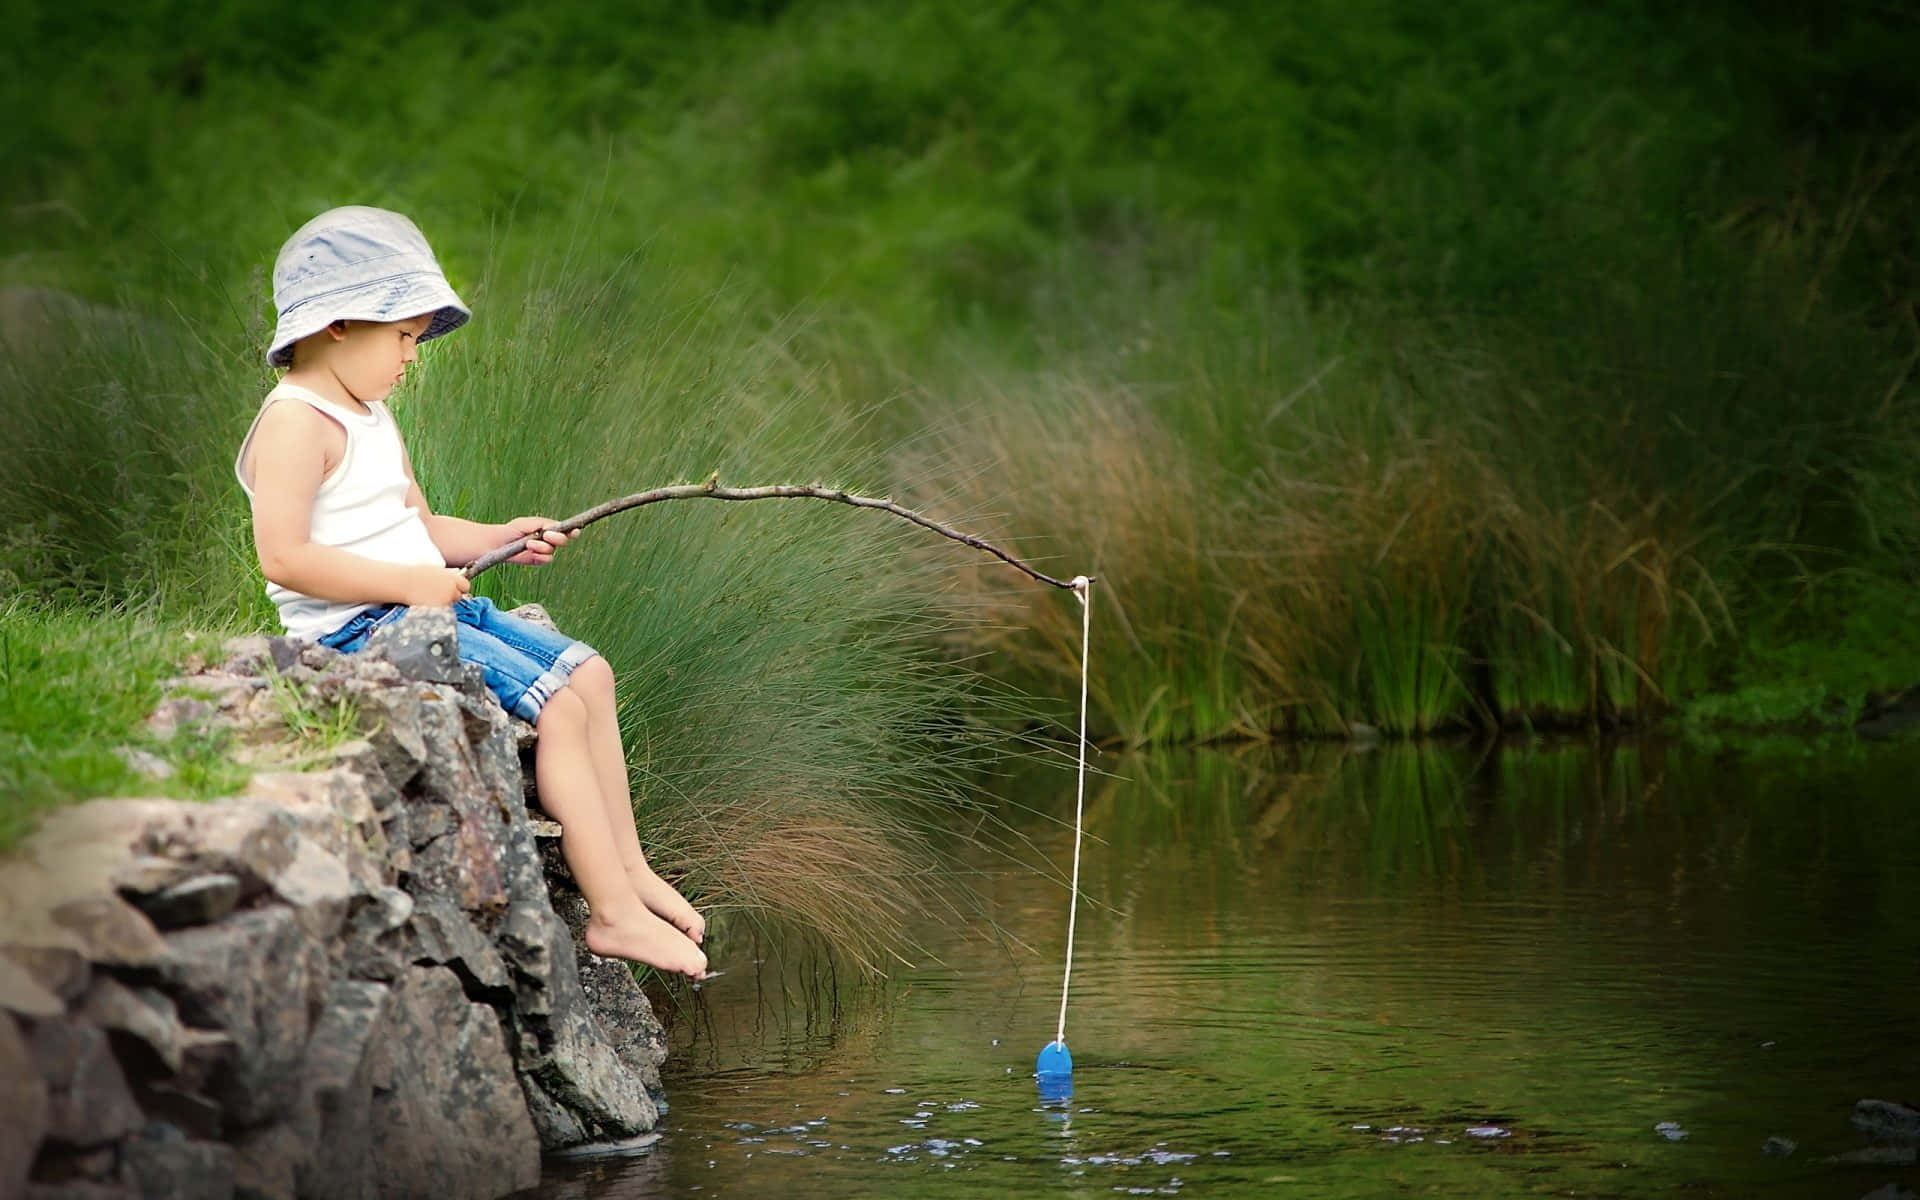 Angler's Delight - Perfect Fishing Rod for Your Next Adventure Wallpaper